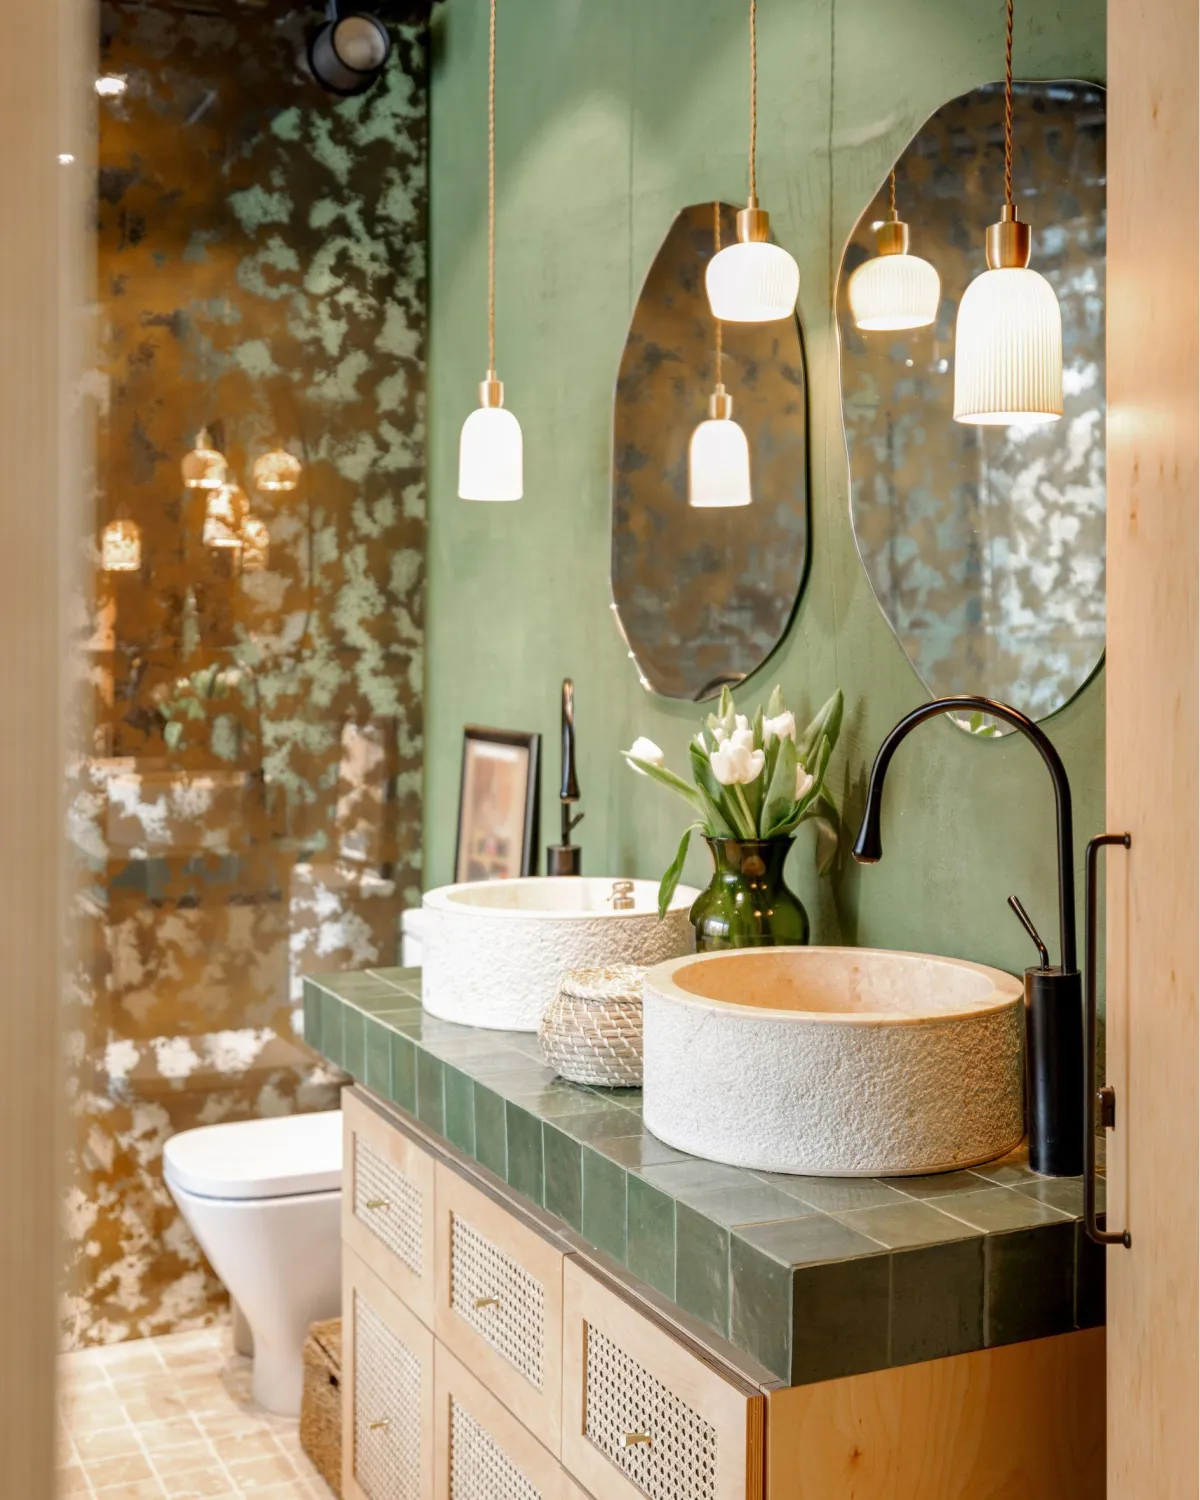 Bohemian-chic bathroom featuring dual textured stone vessel sinks atop a green tile vanity with wicker-front drawers, against an artistic oxidized copper wall creating a verdant backdrop. Pendant lights with white shades hang delicately above, and a fresh bouquet of tulips adds a touch of nature's elegance.